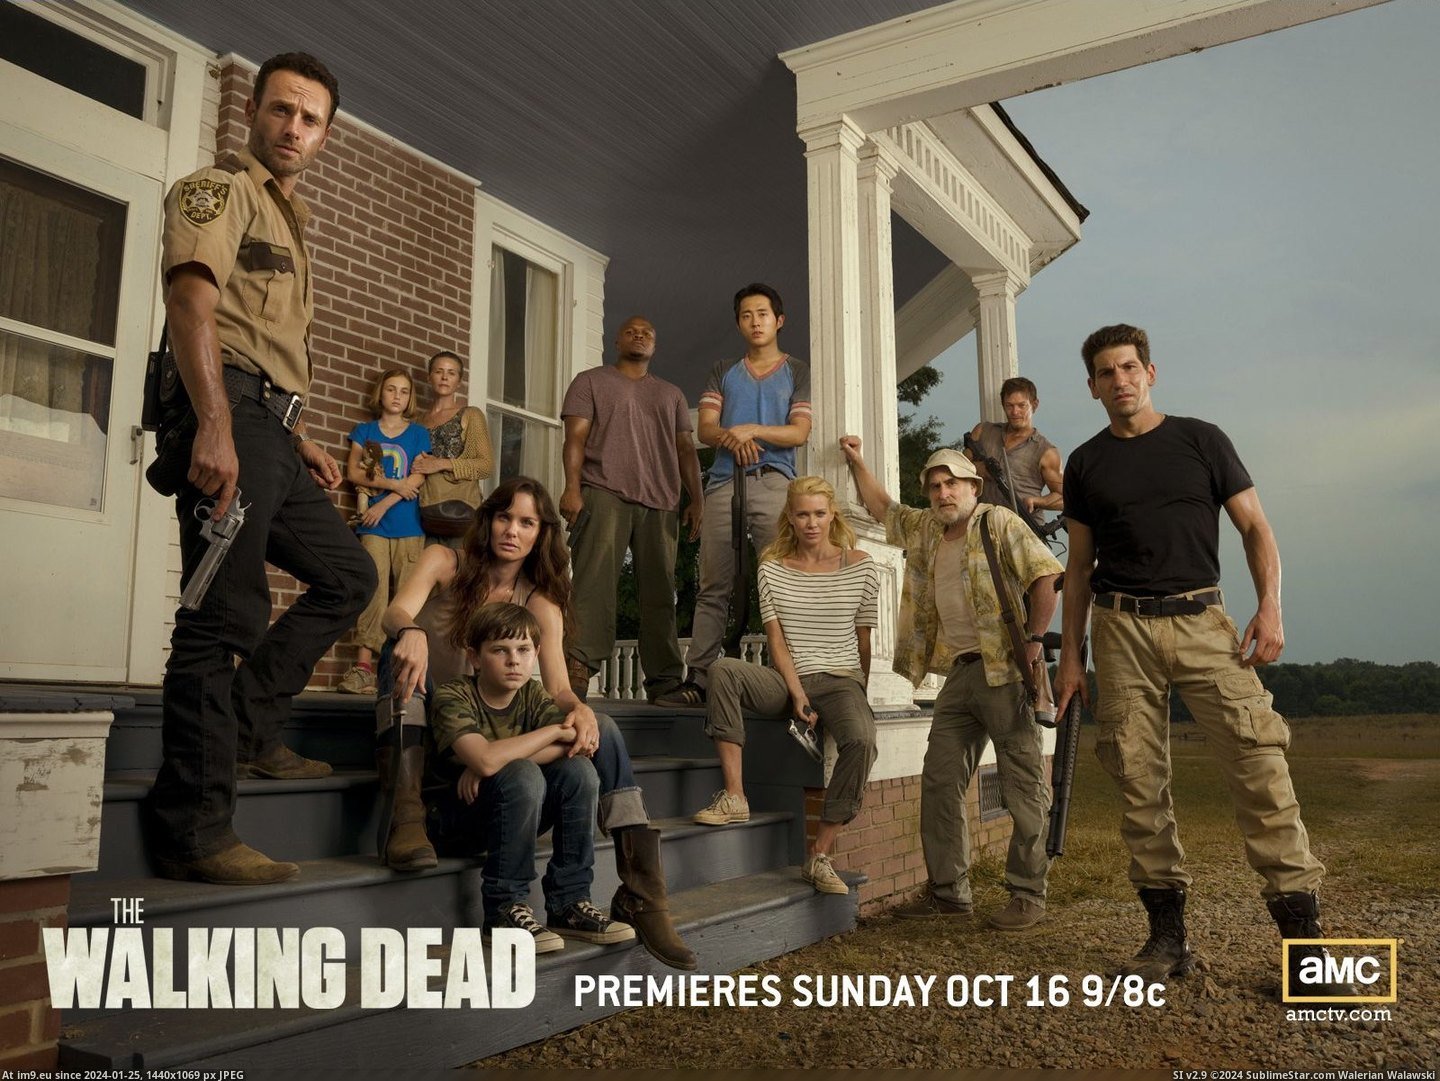 Tv Show The Walking Dead 284475 (in TV Shows HD Wallpapers)